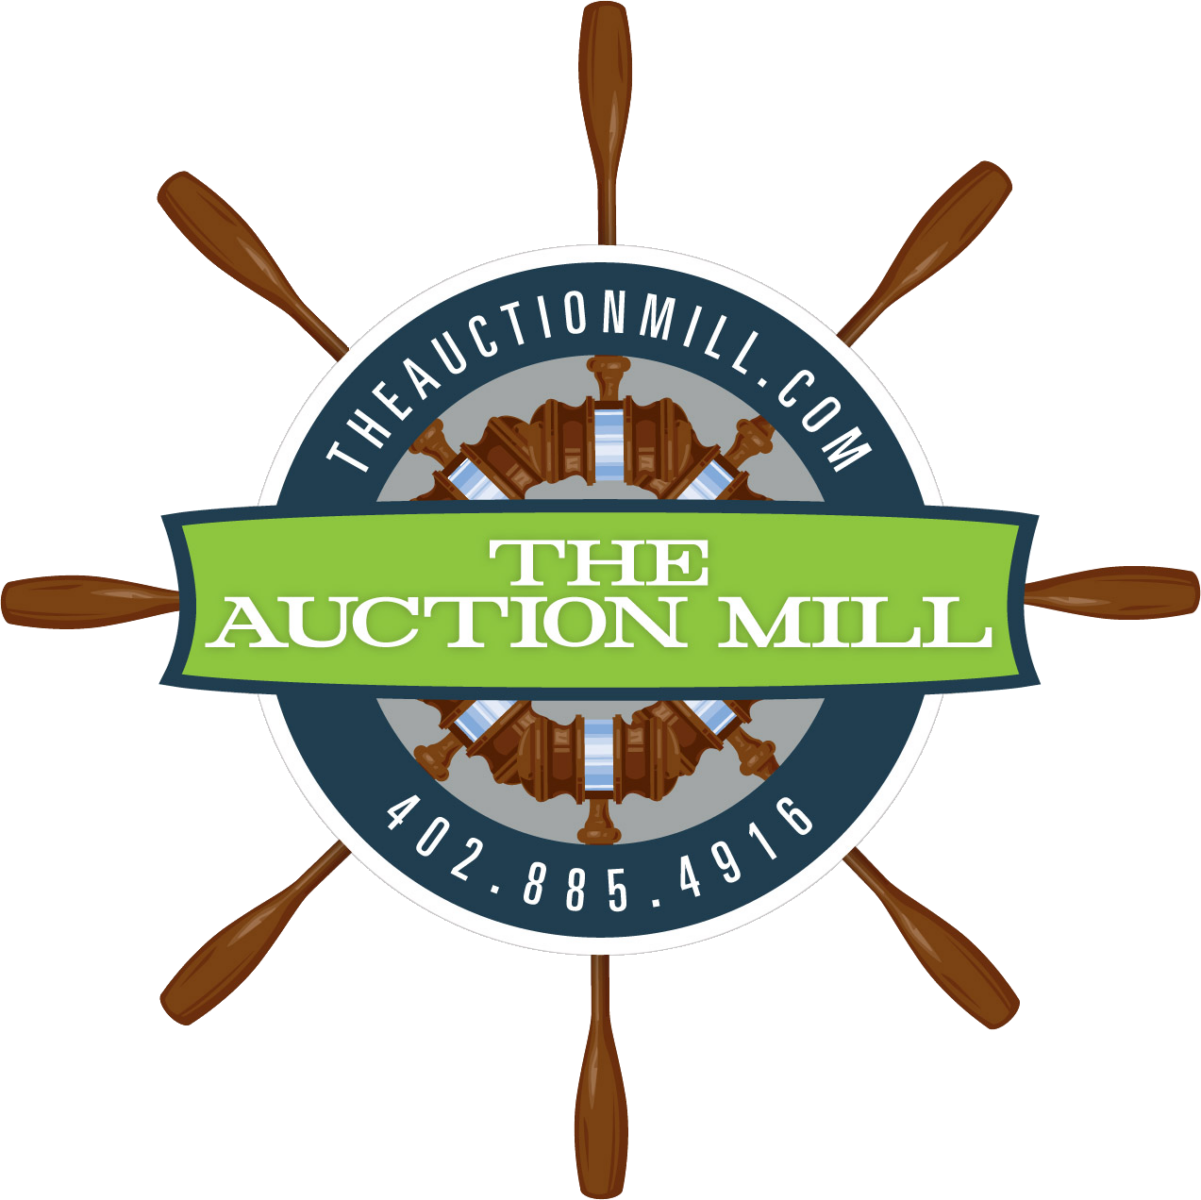 The Auction Mill